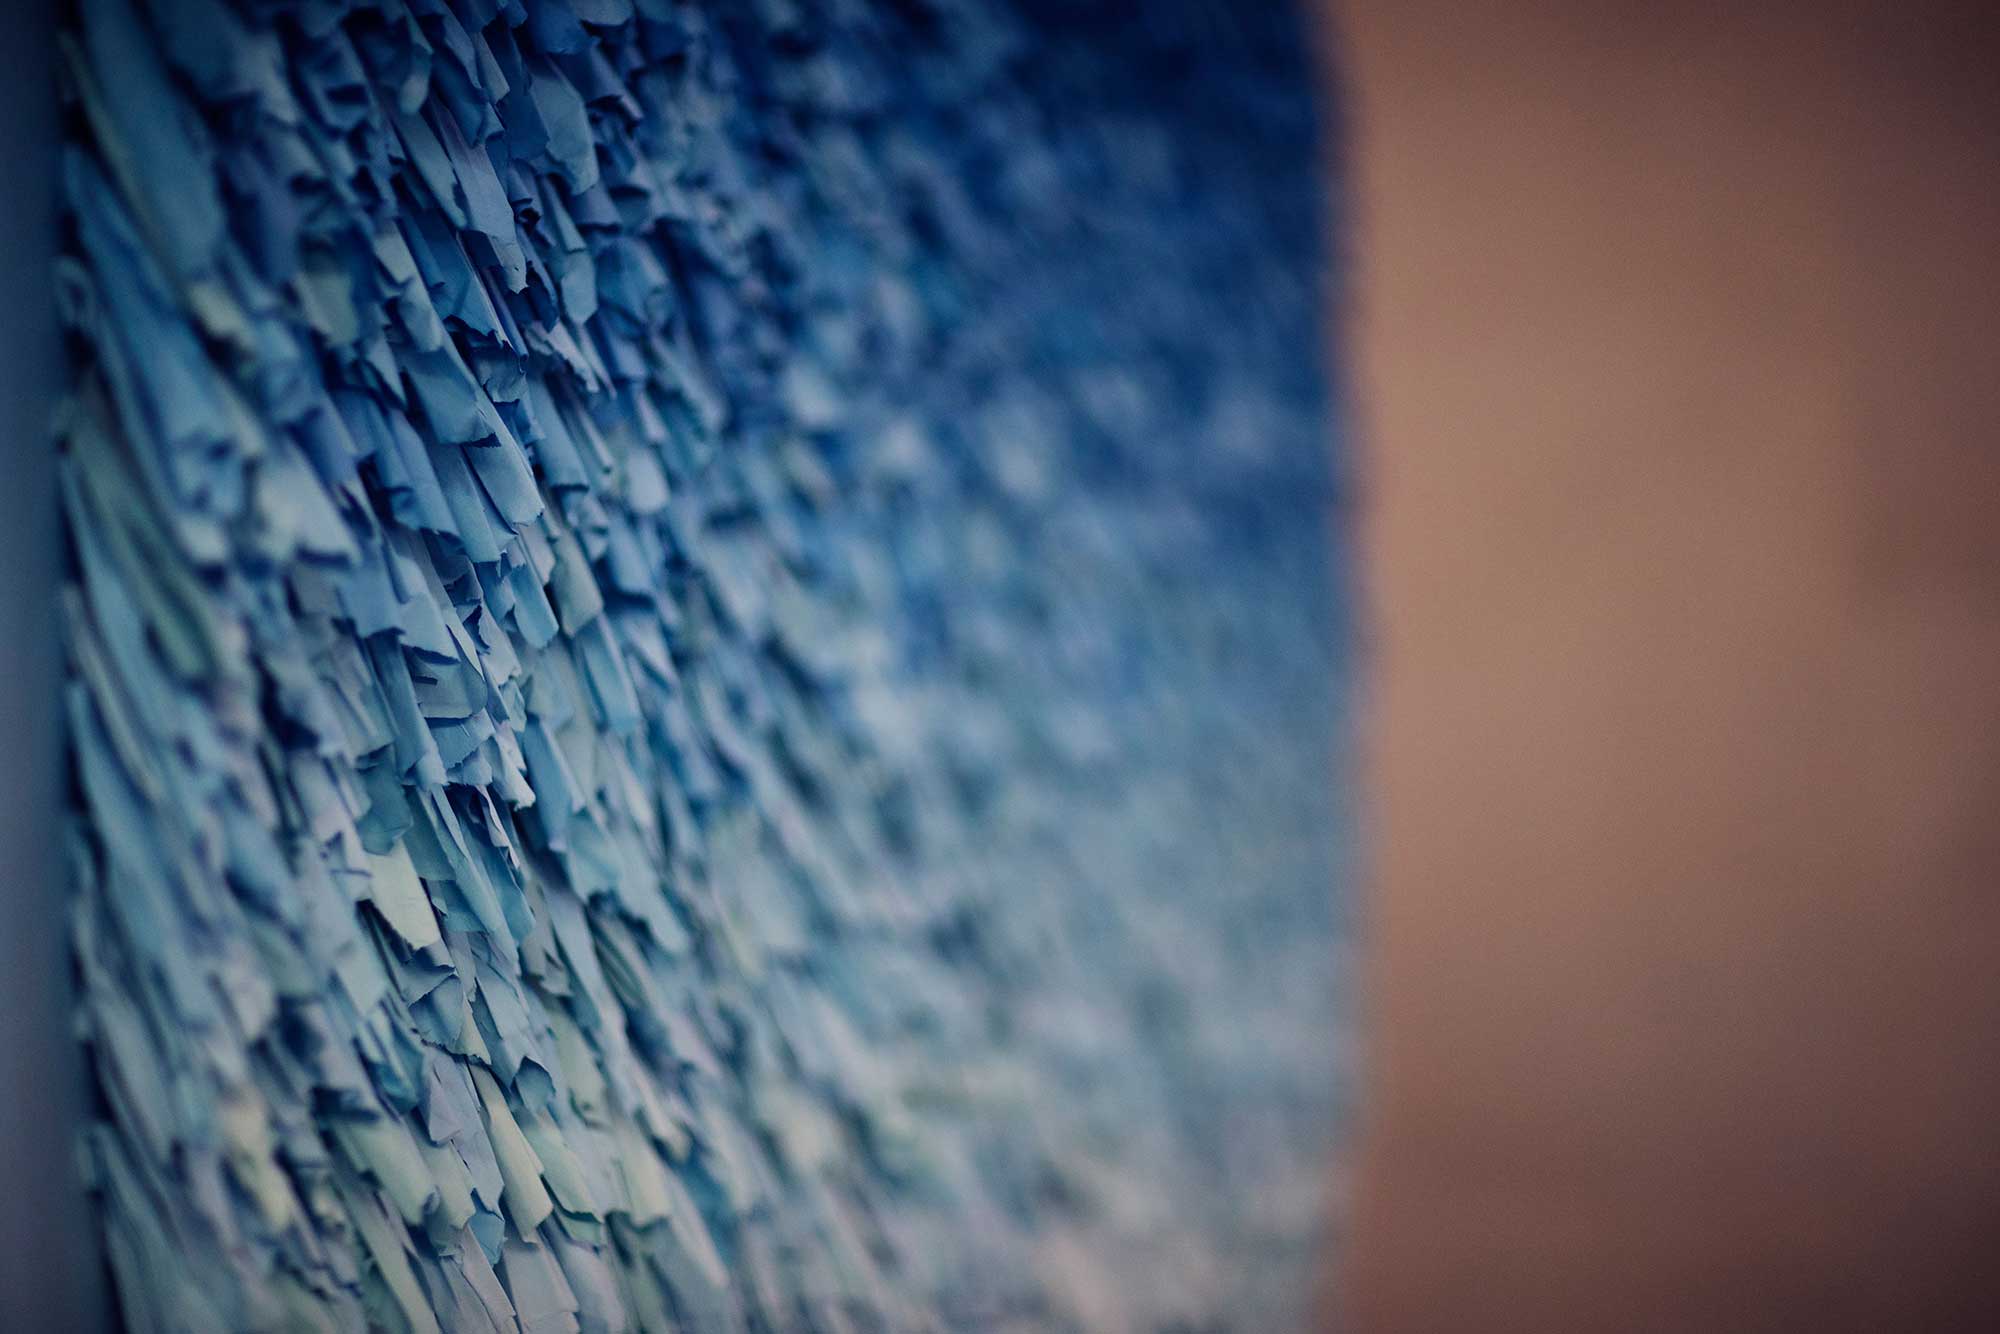 A textured artwork features shades of blue from near-white to deep ocean blue